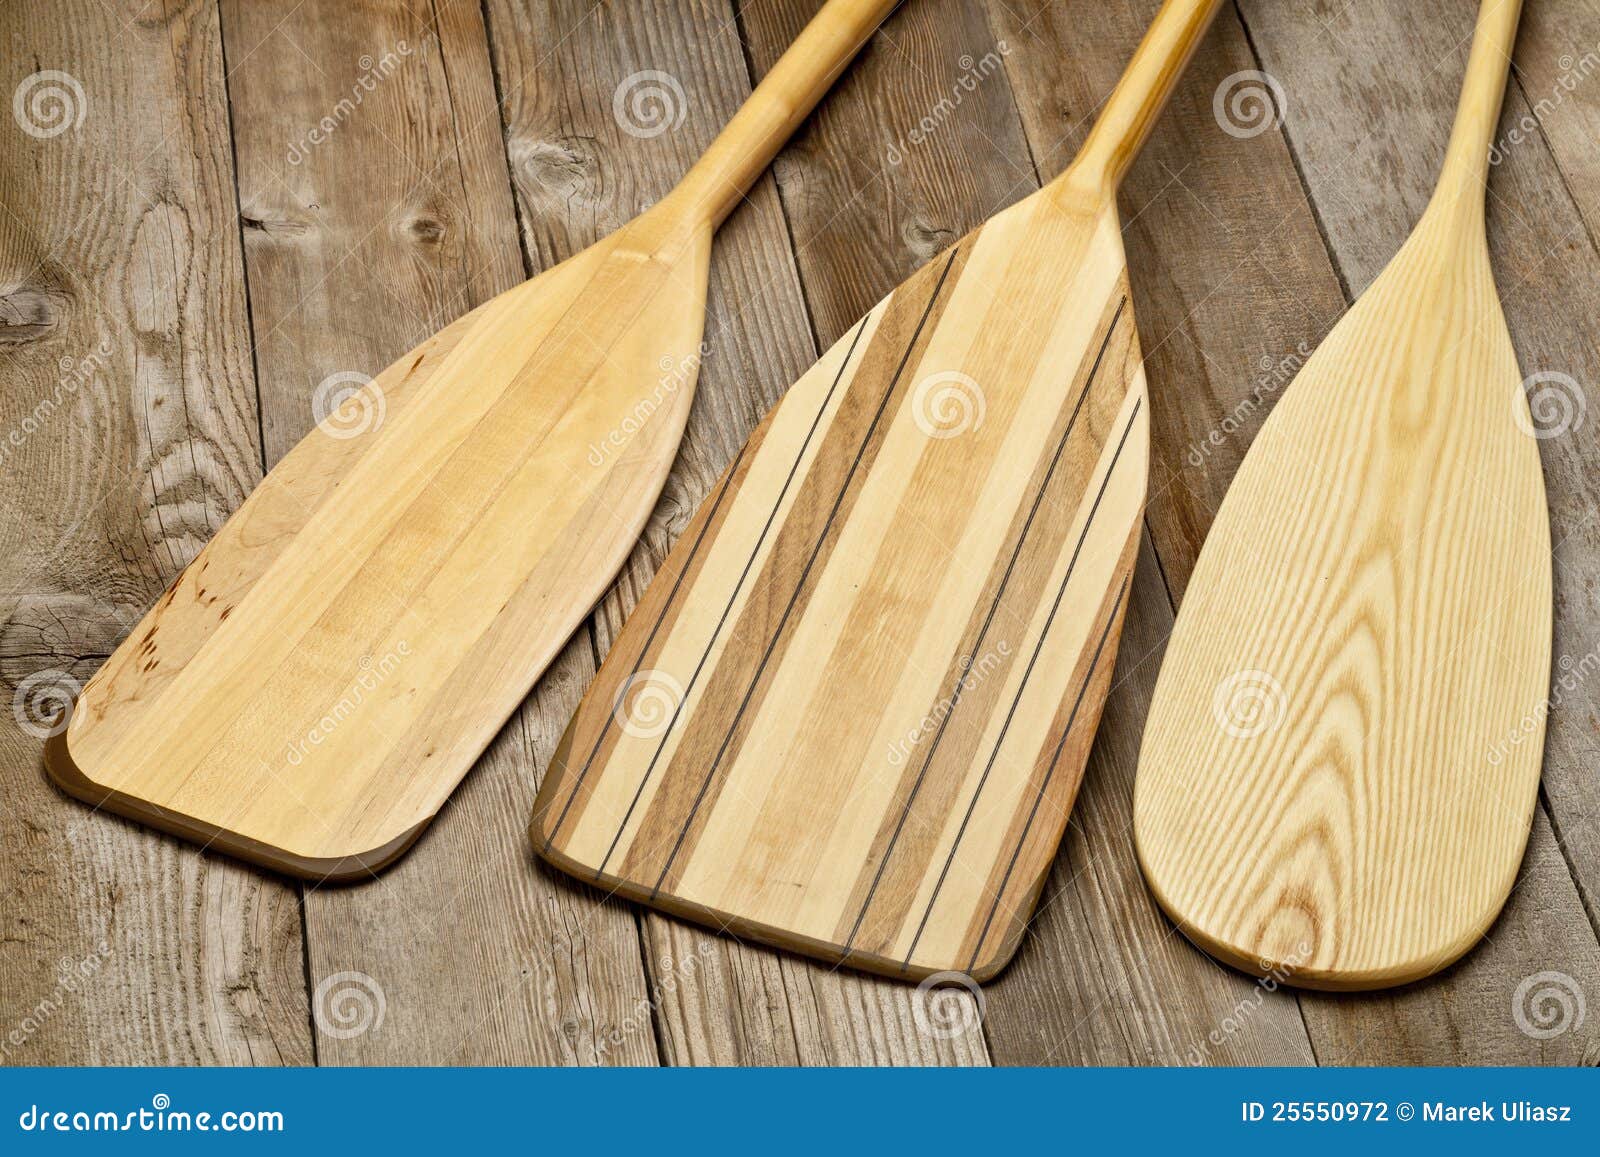  wooden canoe paddles of different shape against grunge wood surface